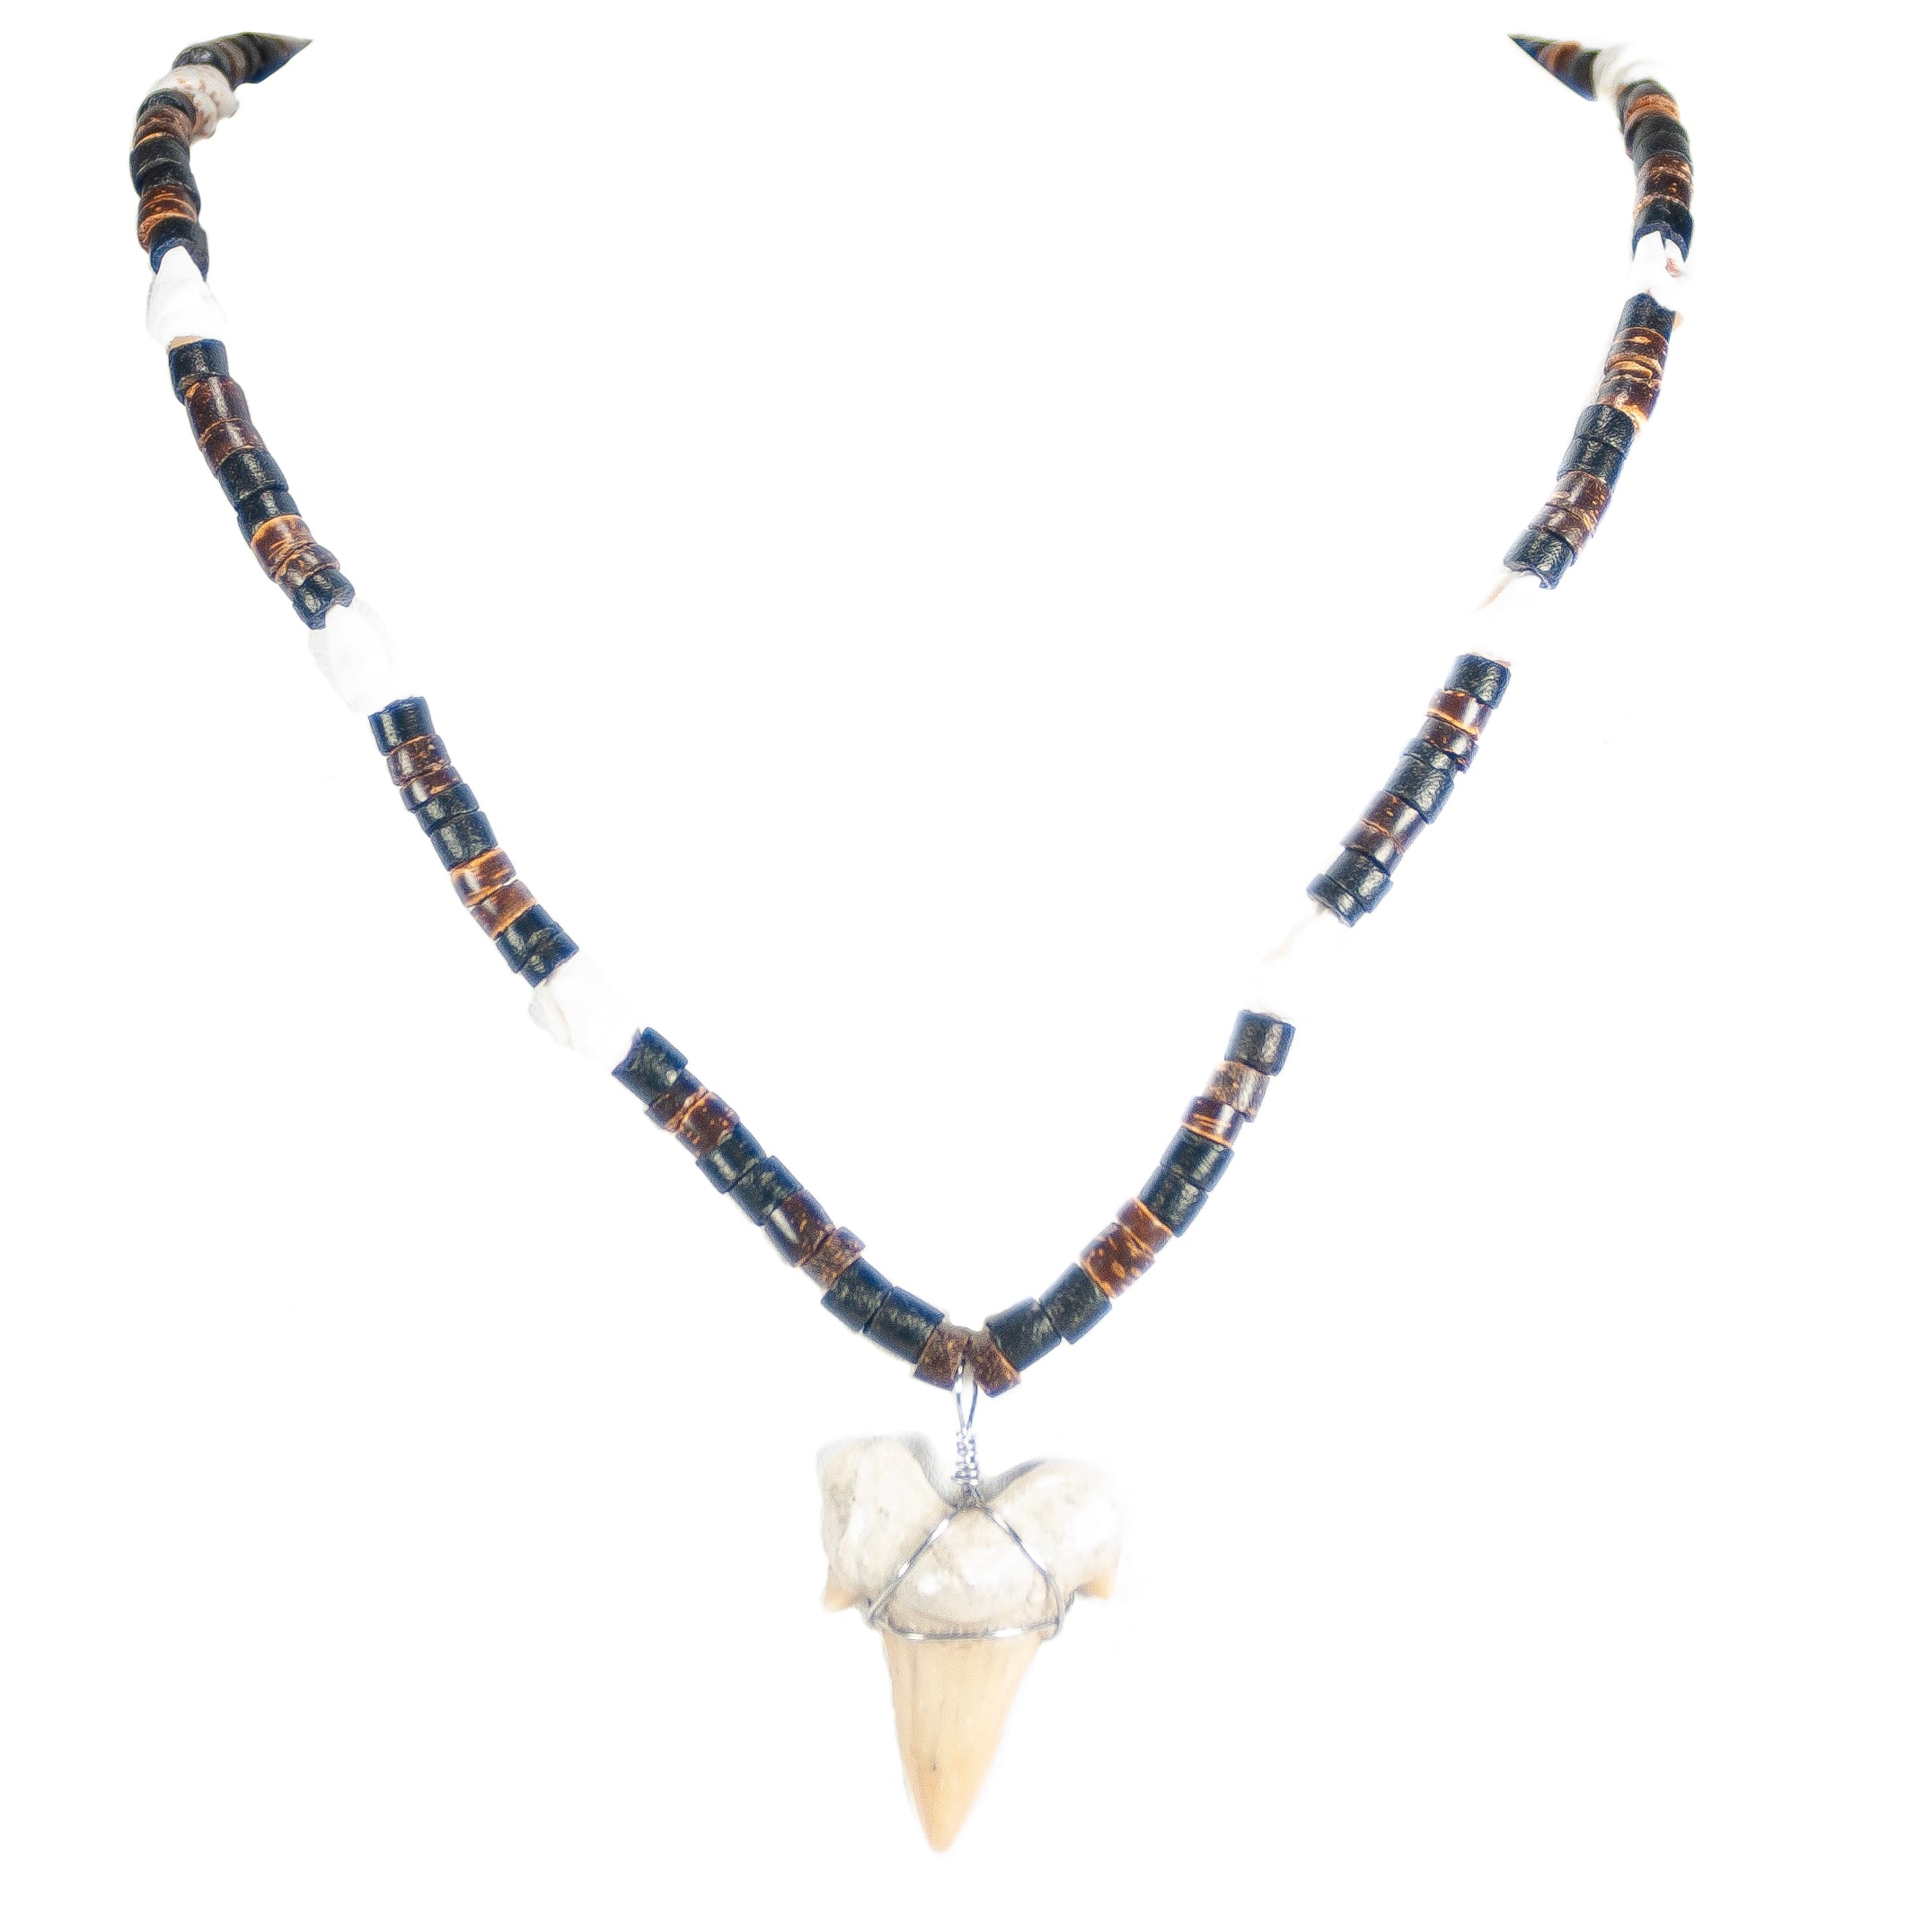 Shark Tooth Pendant on Coconut Beads and Nassa Shells Necklace